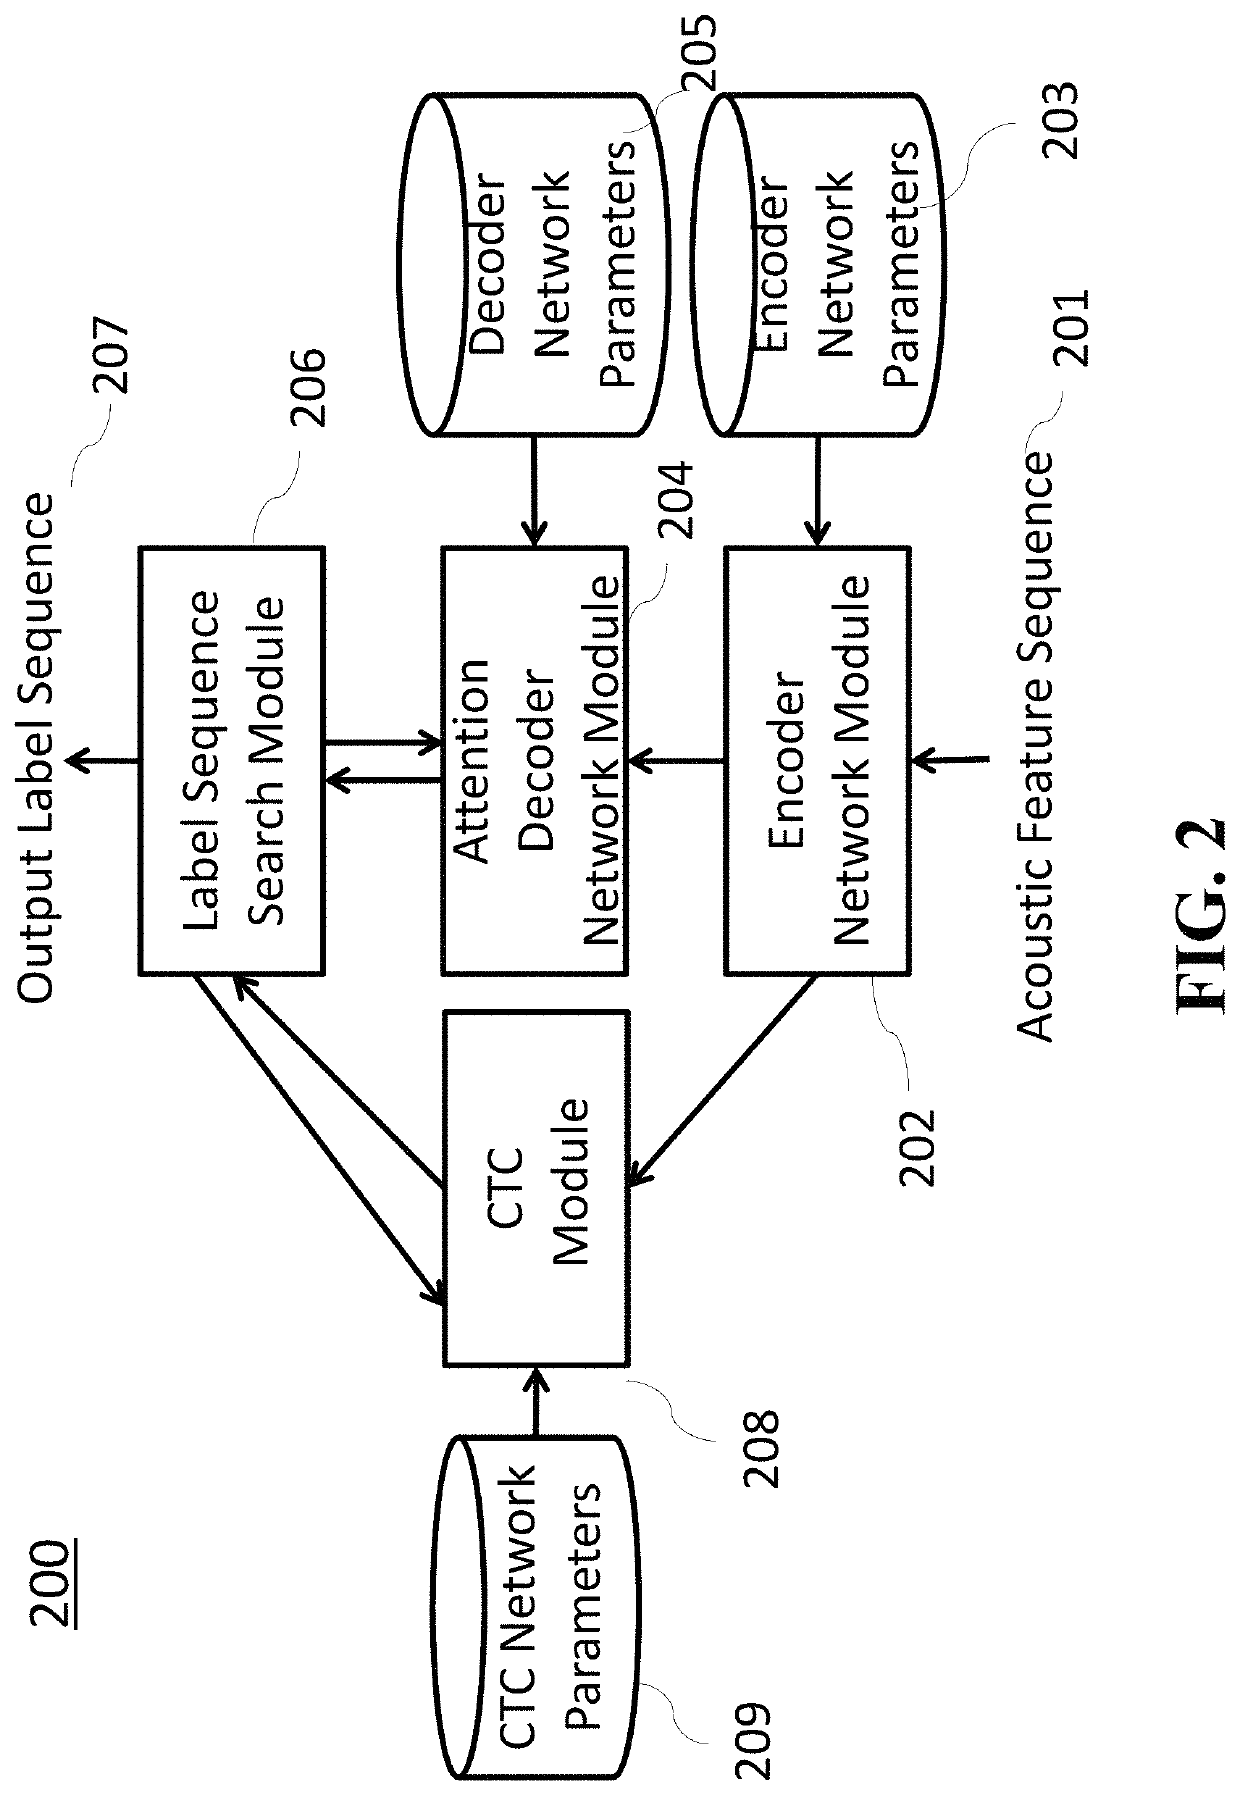 Method and apparatus for multi-lingual end-to-end speech recognition